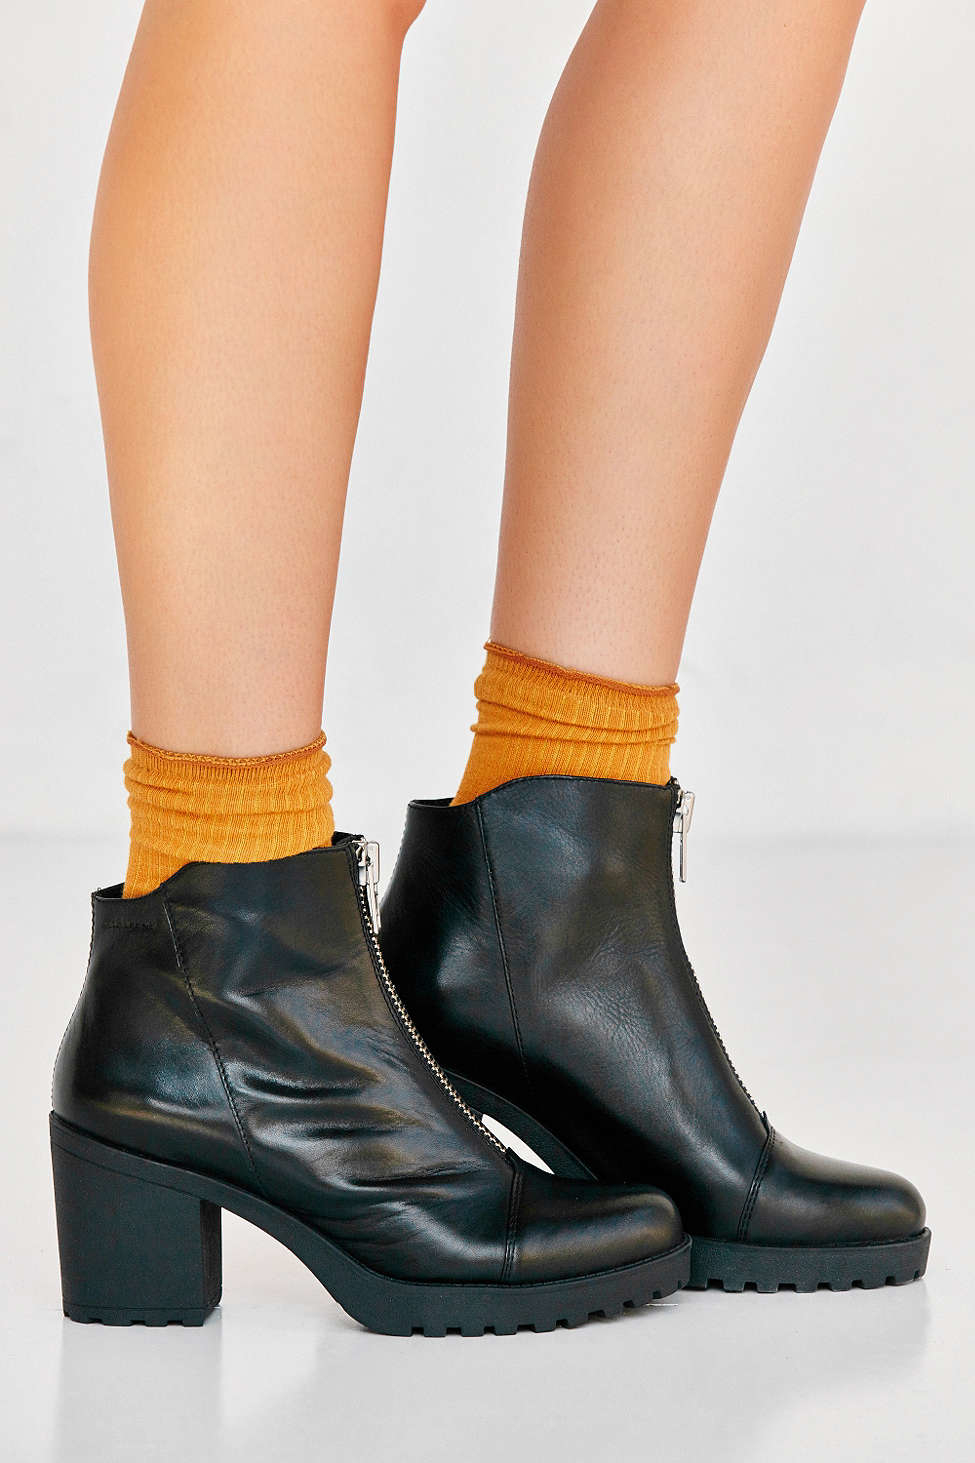 Vagabond Shoemakers Leather Front Zip Grace Ankle Boot in Black | Lyst